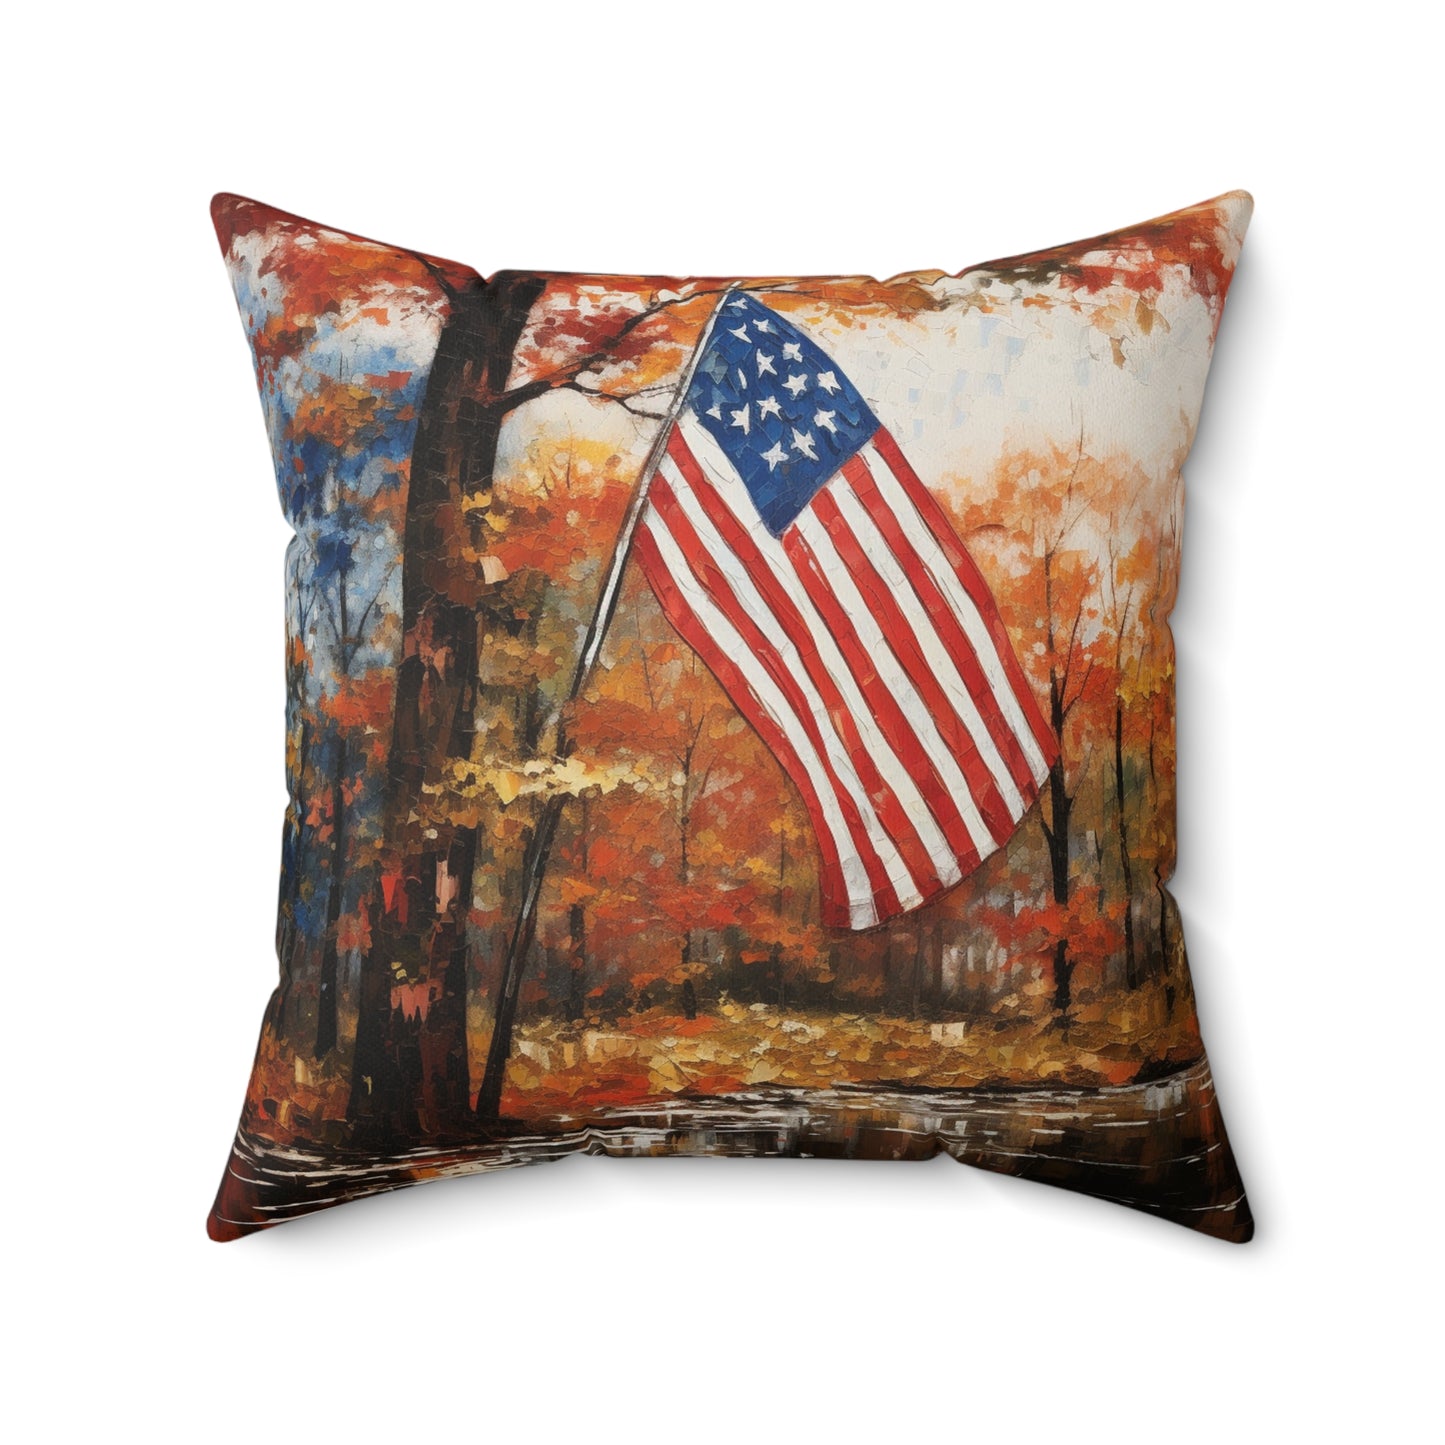 American flag pillow - Weave Got Gifts - Unique Gifts You Won’t Find Anywhere Else!